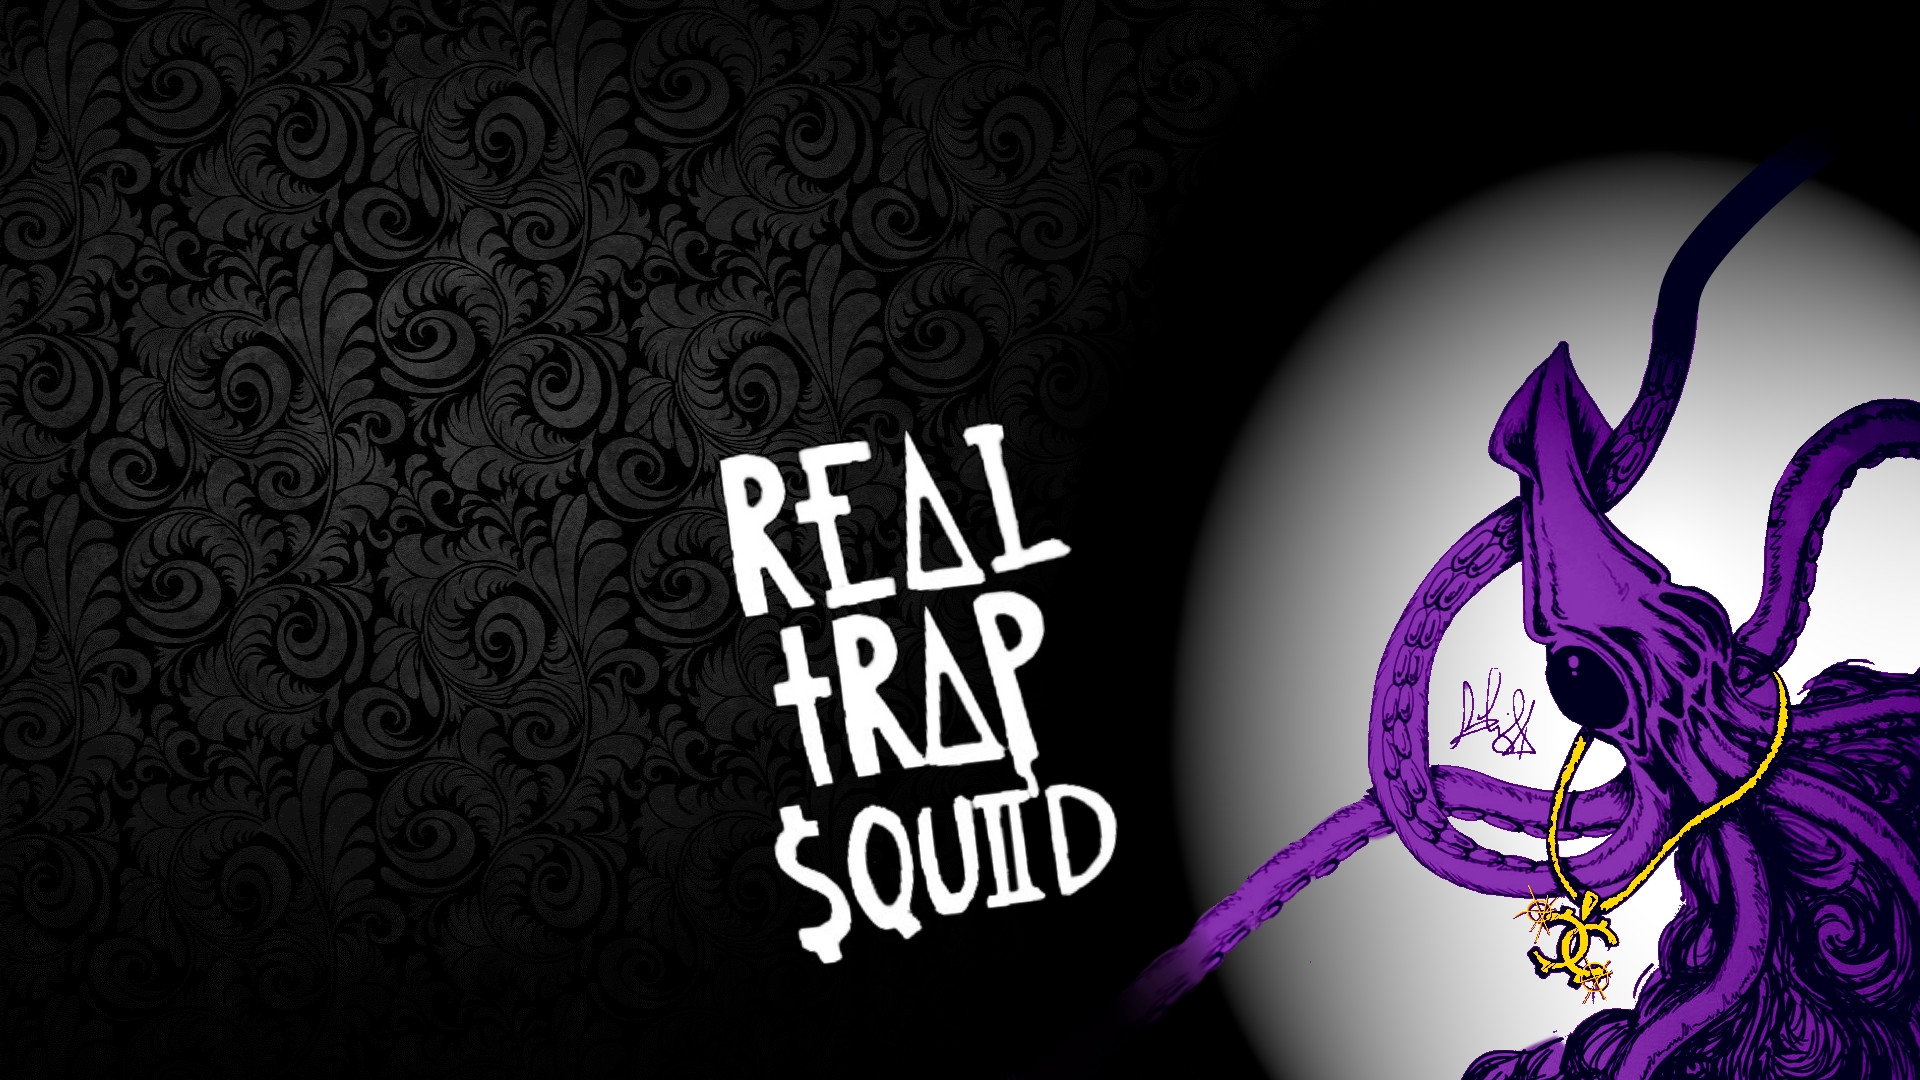 Made A Wallpaper Of The Trap Squid R Showed